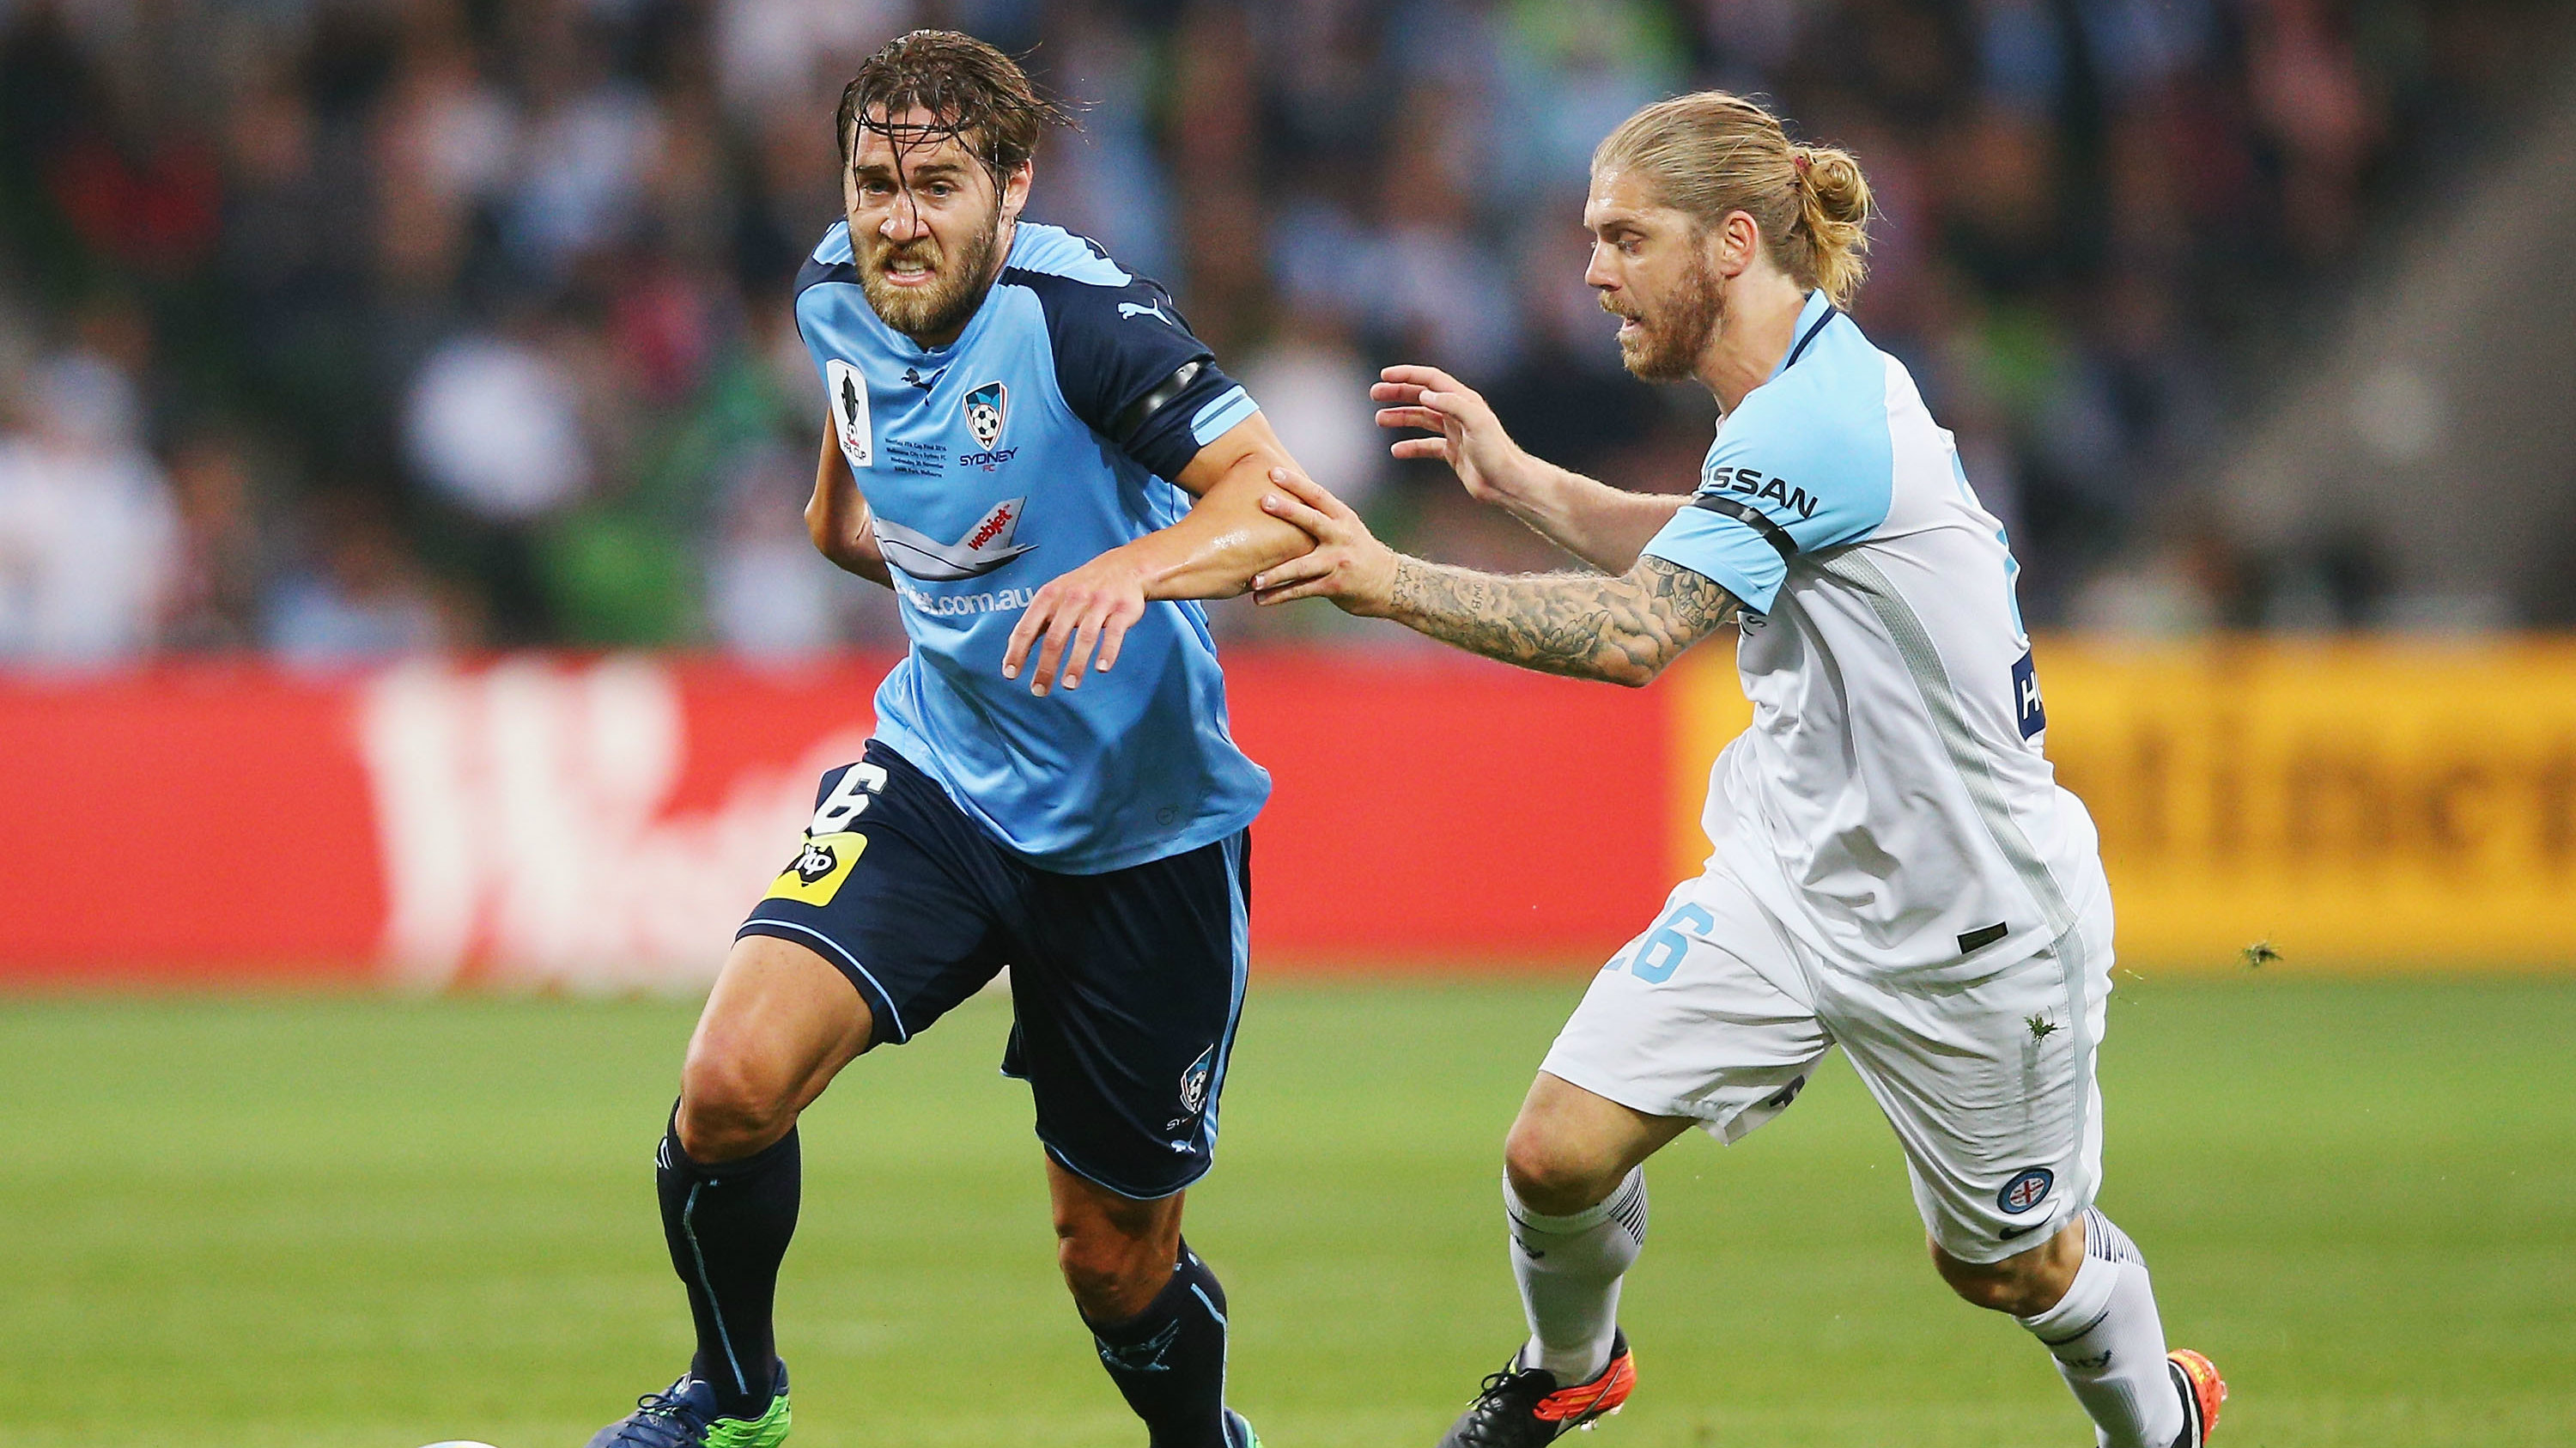 Sydney FC will host Melbourne City in the Quarter Finals.